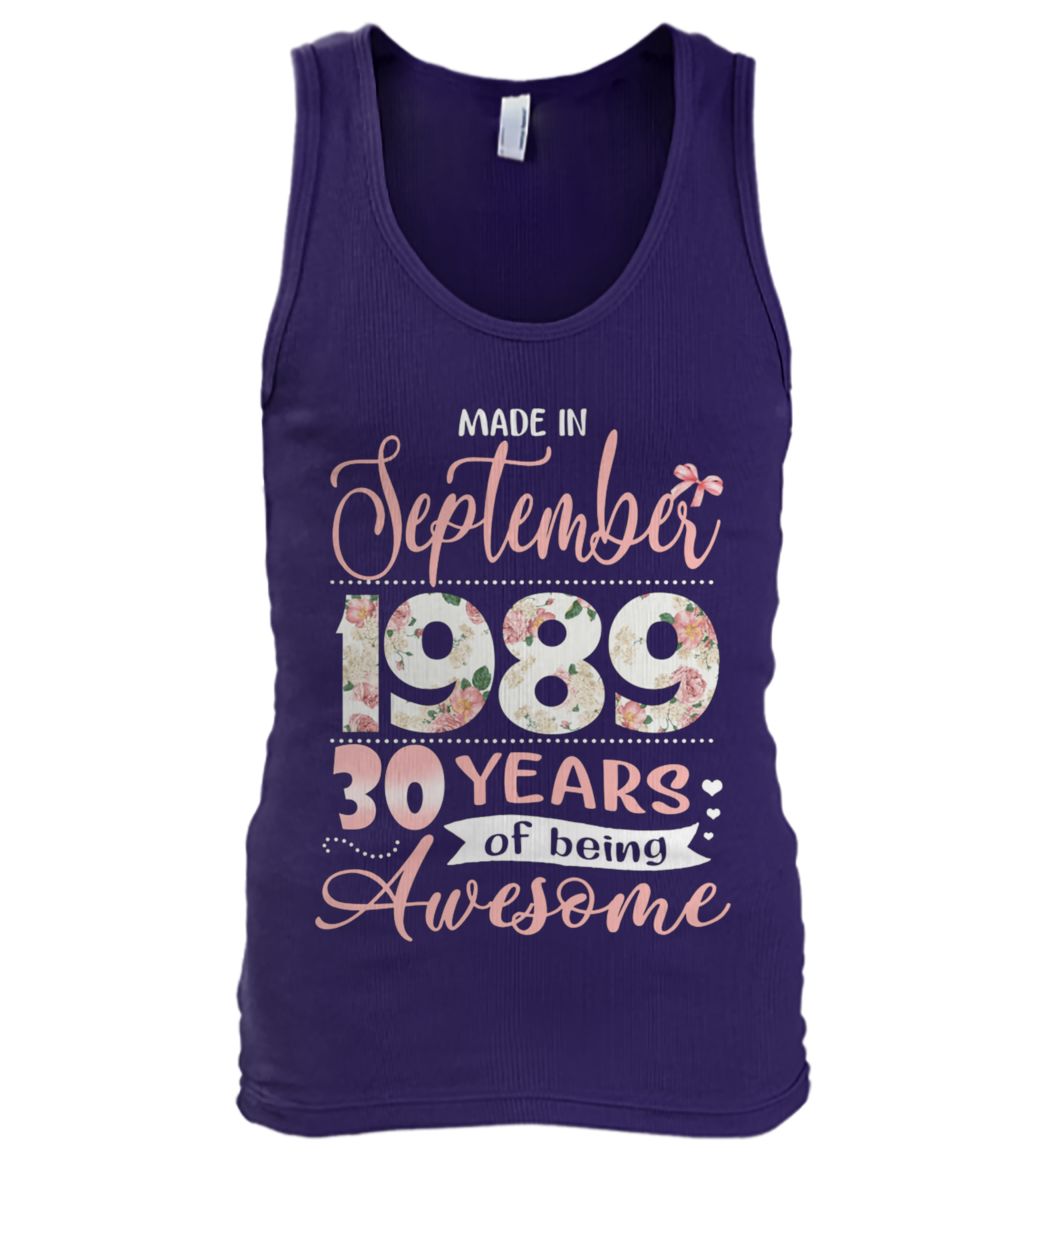 Floral made in september 1989 30 years of being awesome men's tank top